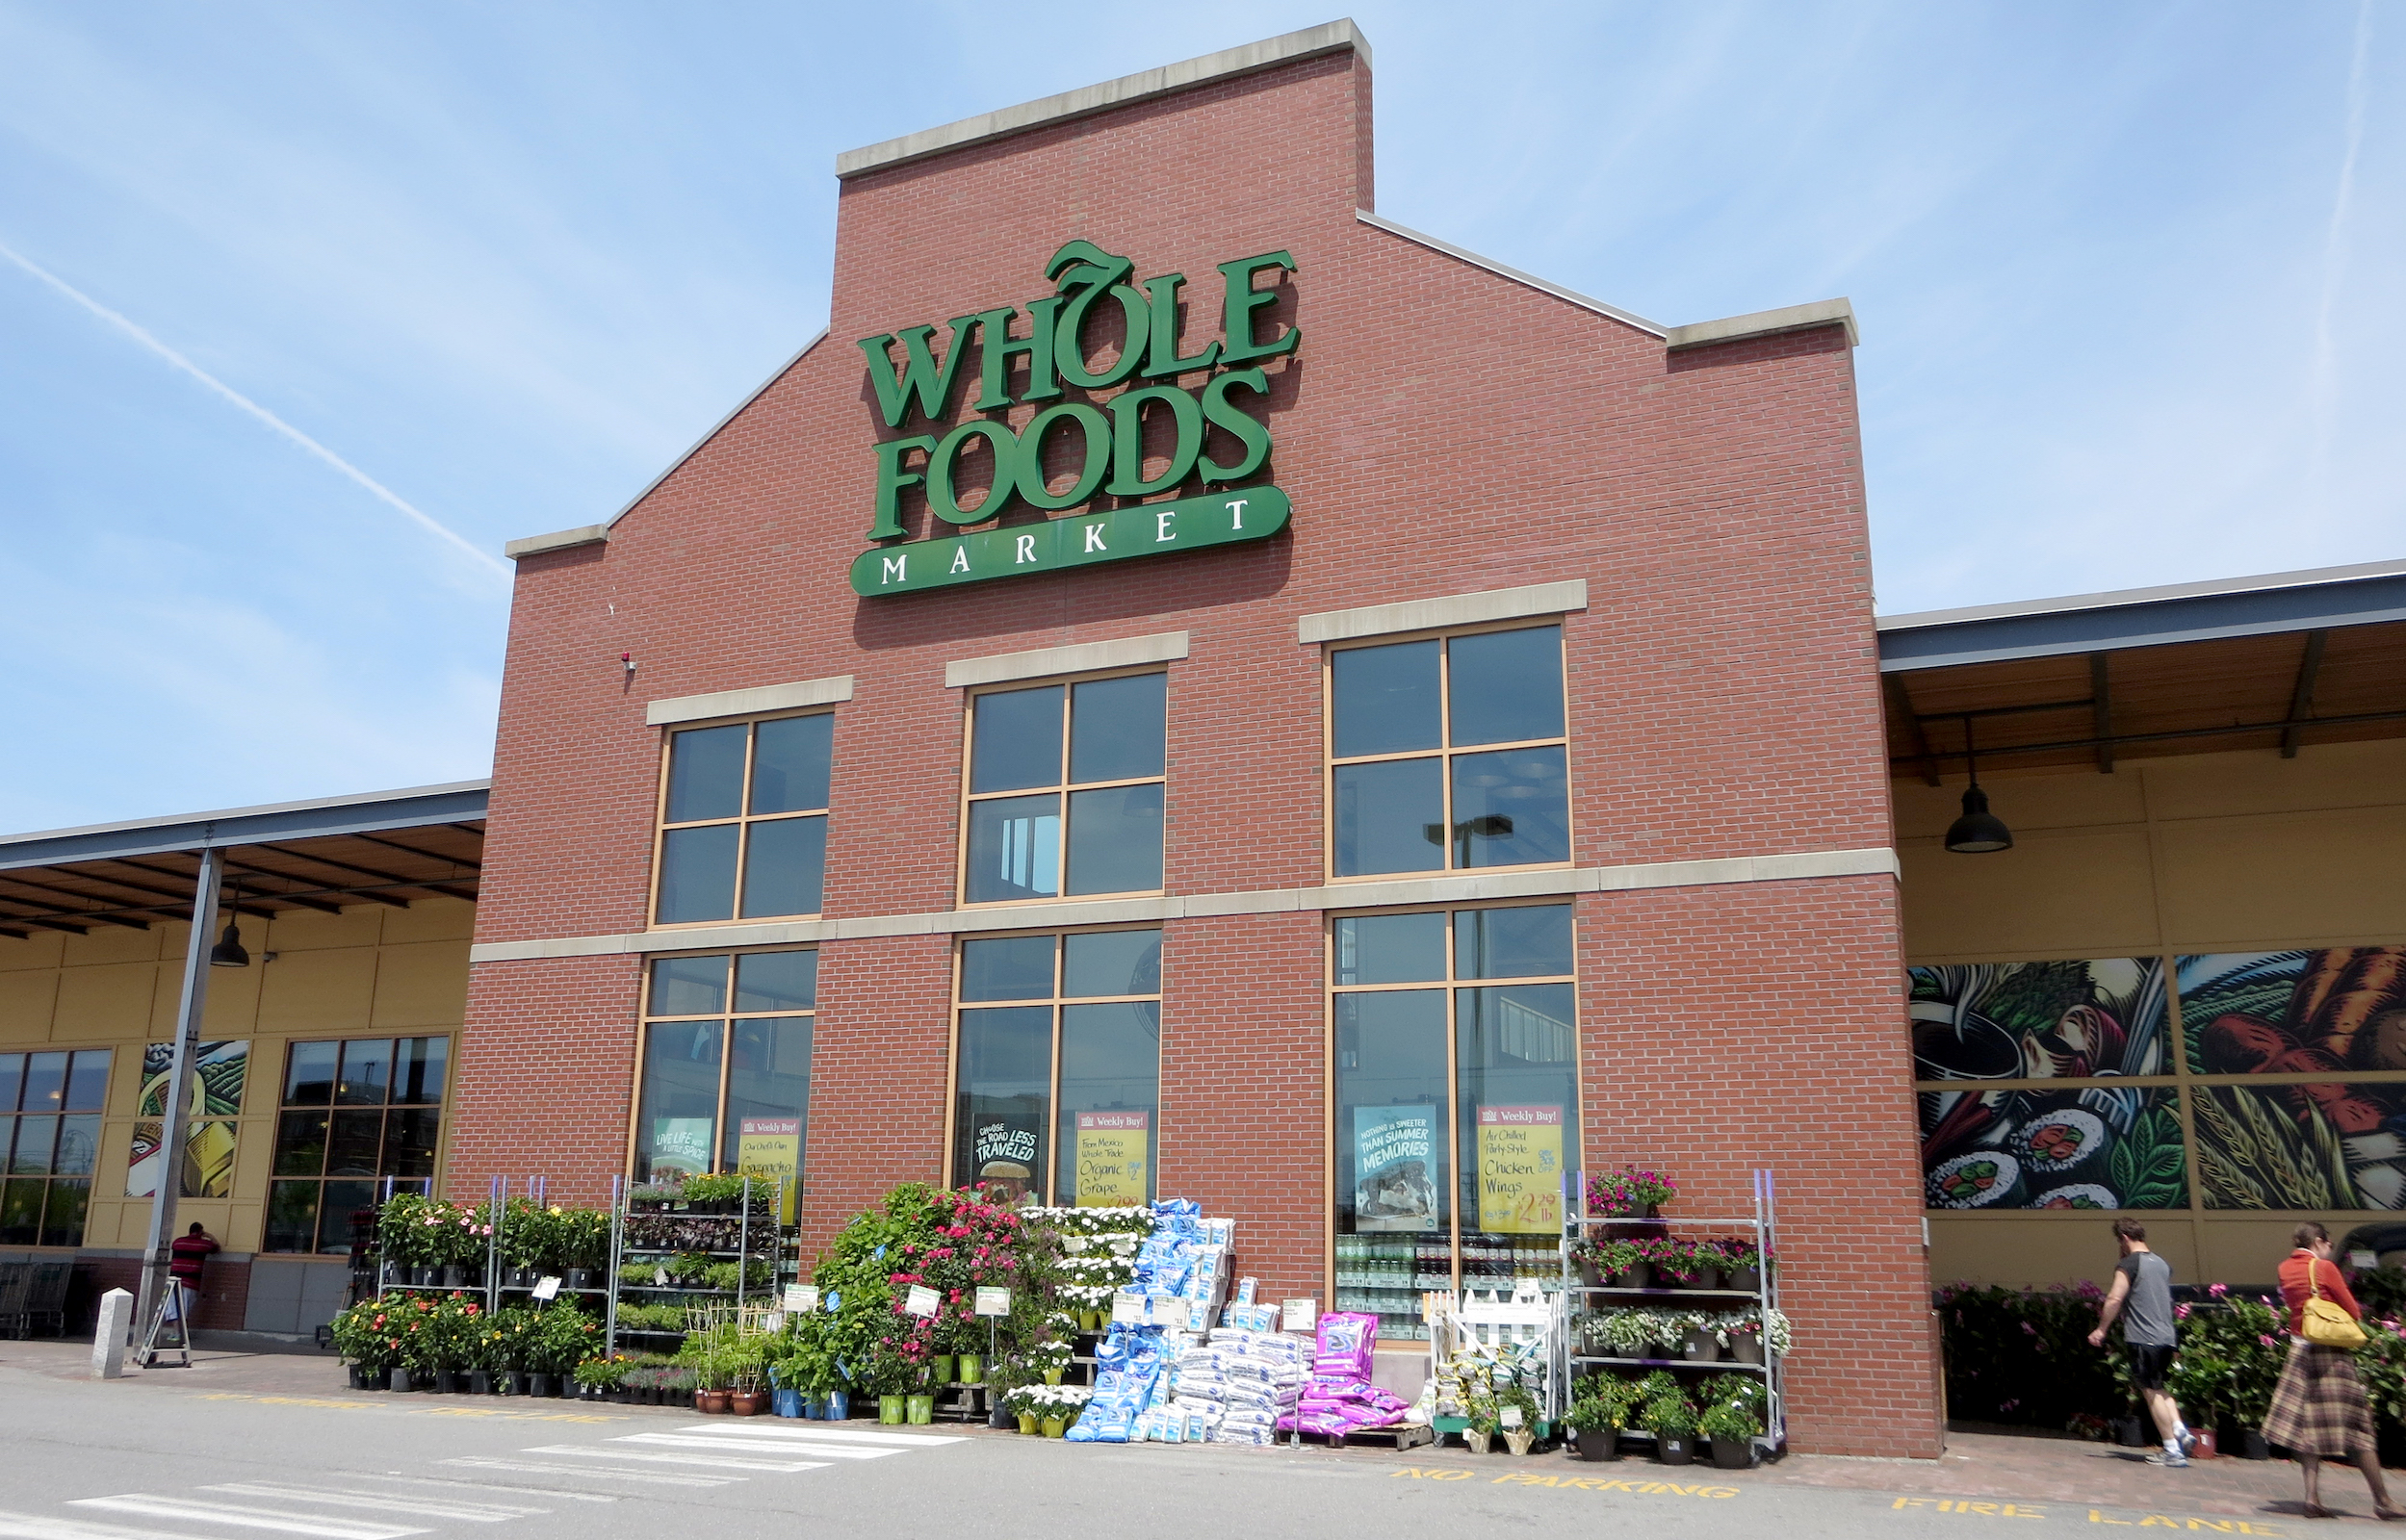 Amazon wants your palm print scanned to pay at dozens more Whole Foods